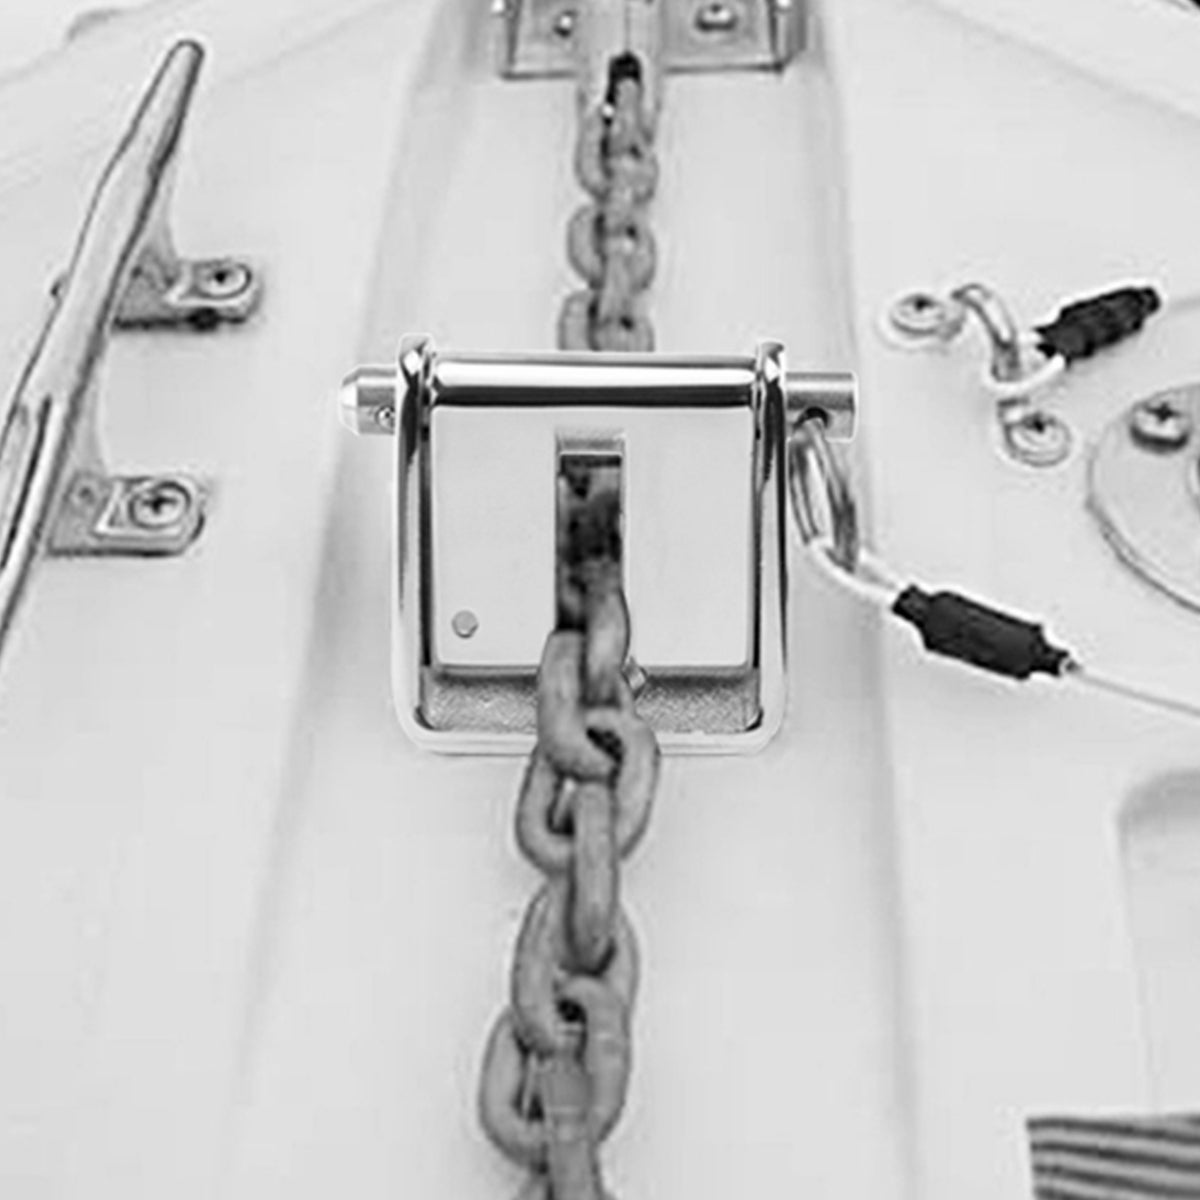 Gray BSET MATEL Chain Stopper Marine Grade 316 Stainless Steel Boat Anchor Safety Lock Anchor Chain Lock Stop Protect windlass Hardware